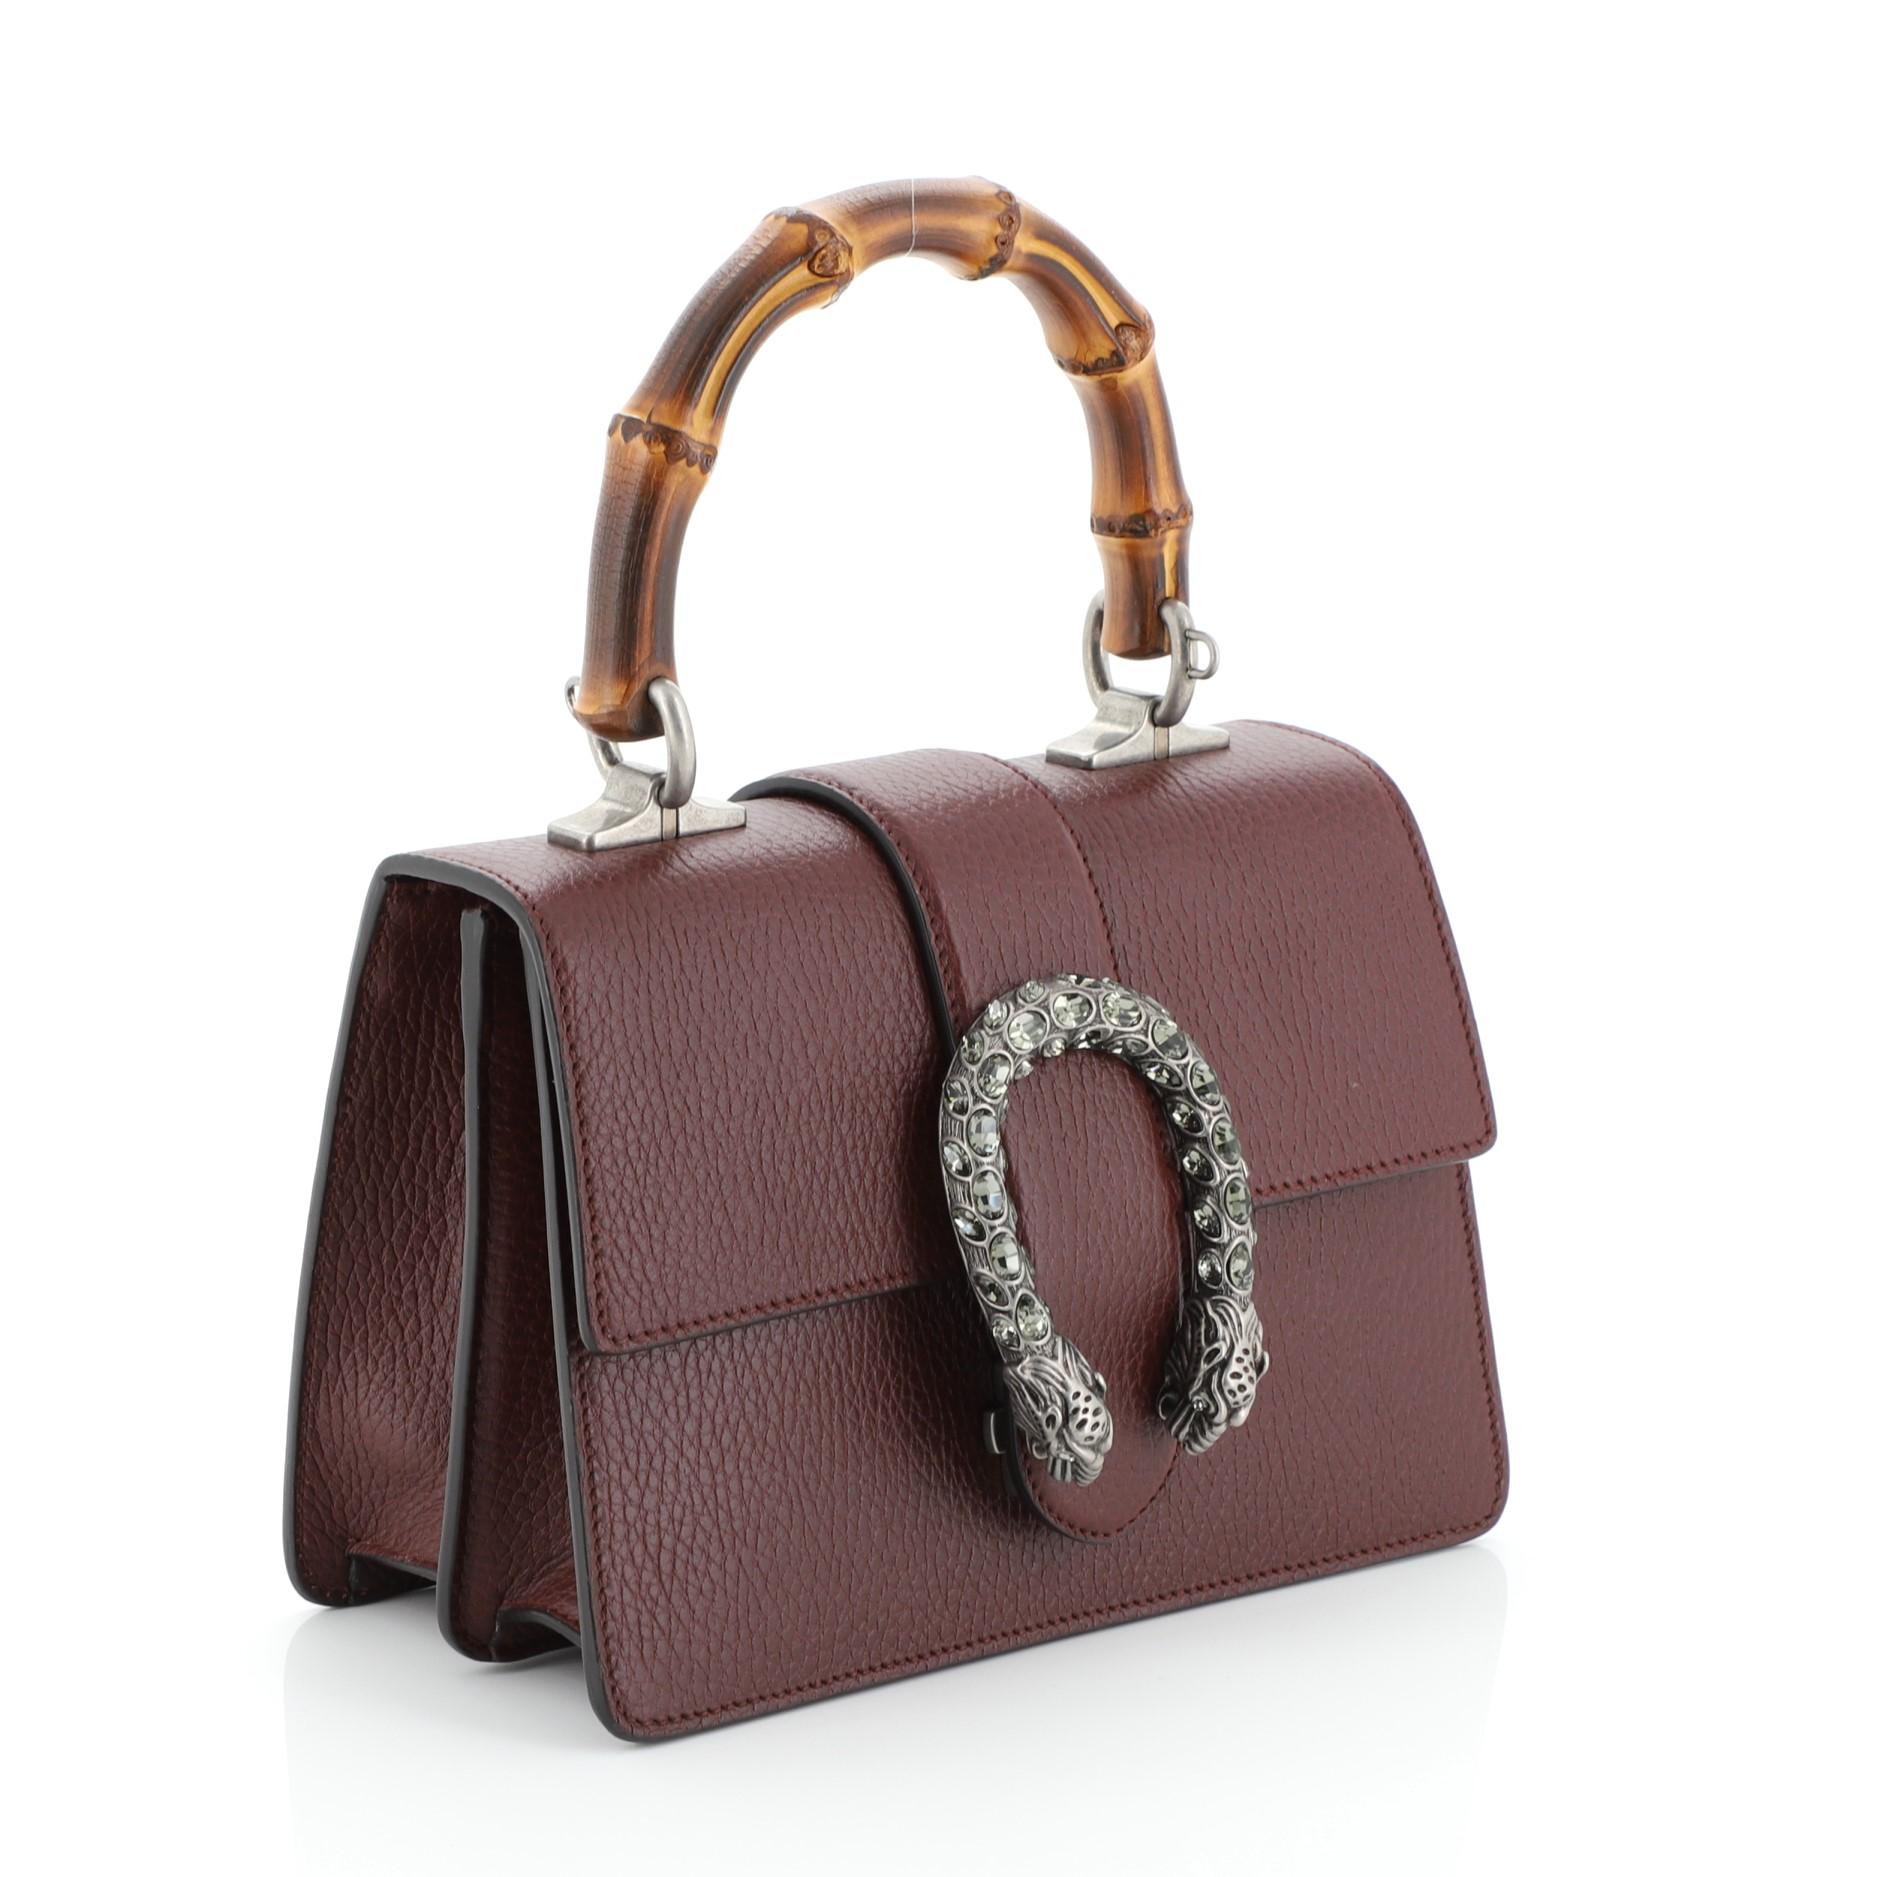 This Gucci Dionysus Bamboo Top Handle Bag Leather Mini, crafted from red leather, features a bamboo top handle, textured tiger head spur detail on its flap, and aged silver-tone hardware. Its flap closure with side release opens to a neutral fabric